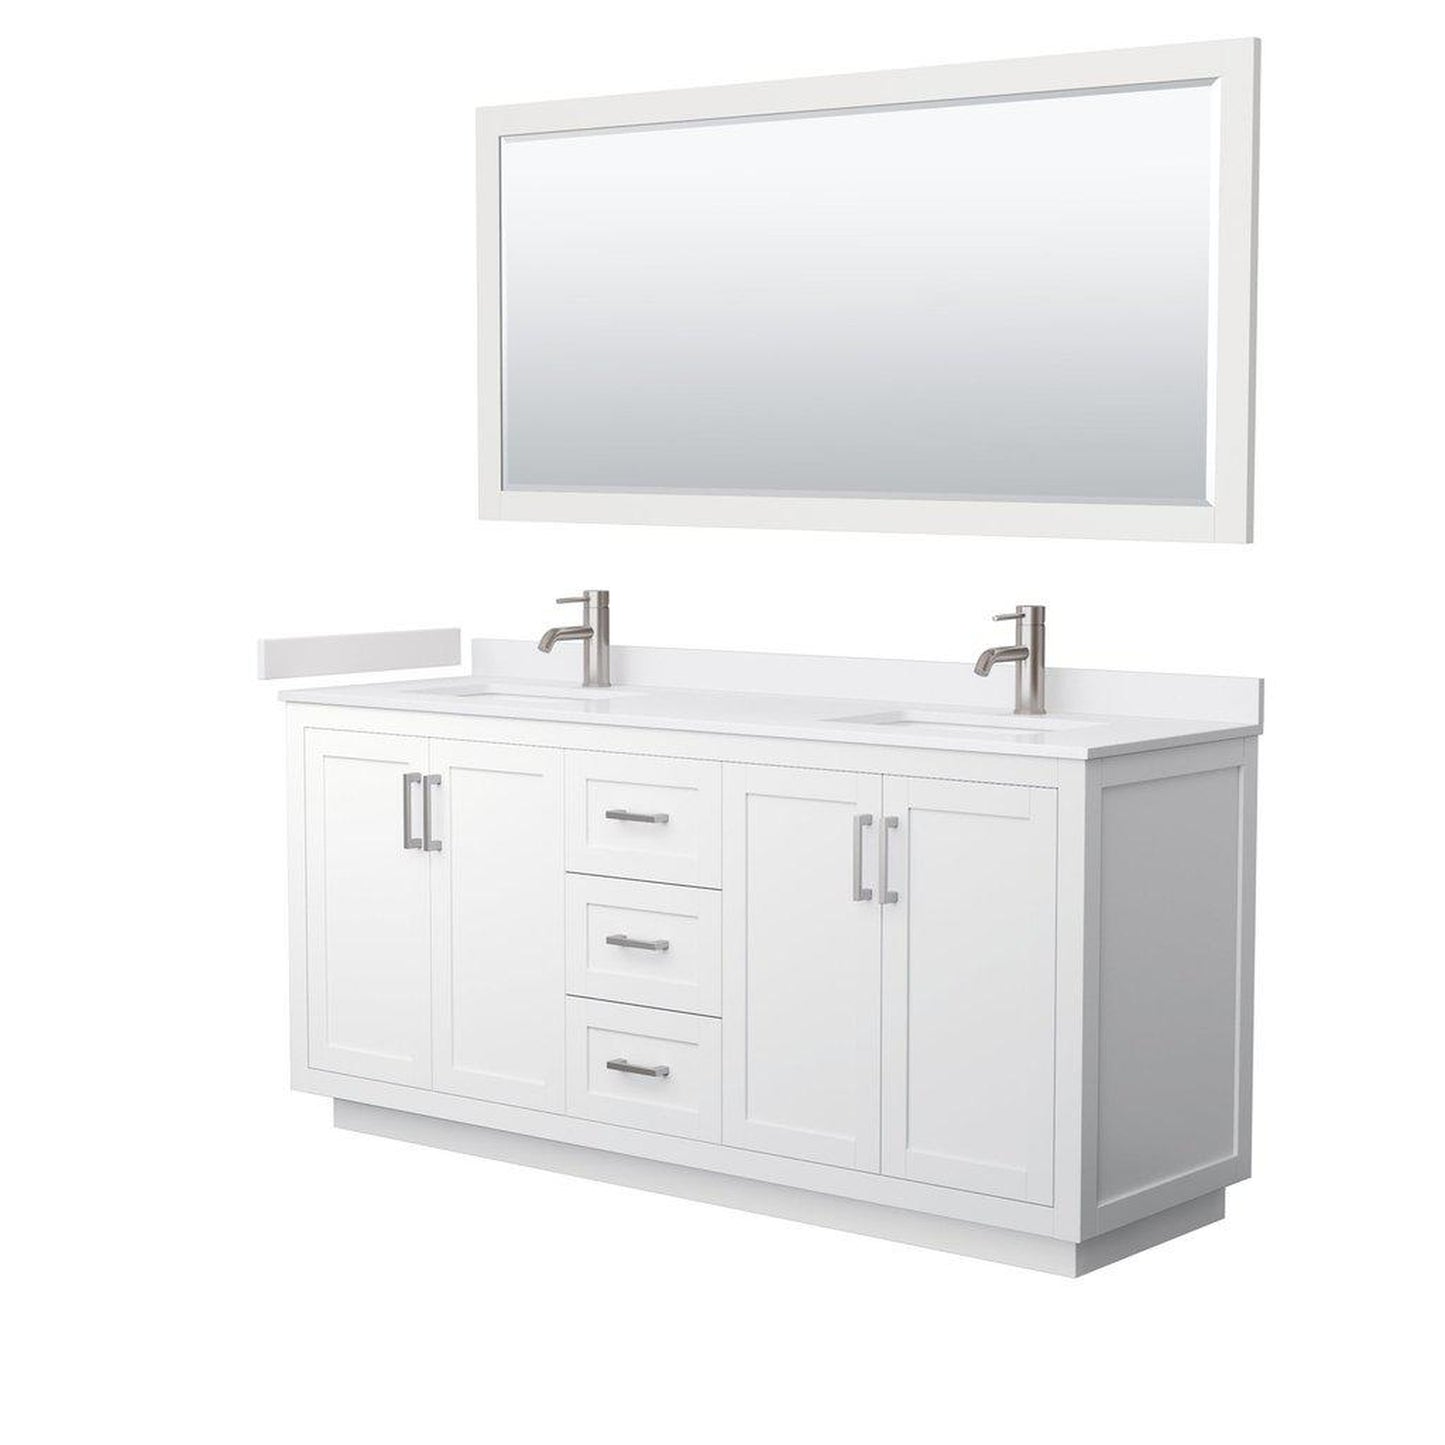 Wyndham Collection Miranda 72" Double Bathroom White Vanity Set With White Cultured Marble Countertop, Undermount Square Sink, 70" Mirror And Brushed Nickel Trim